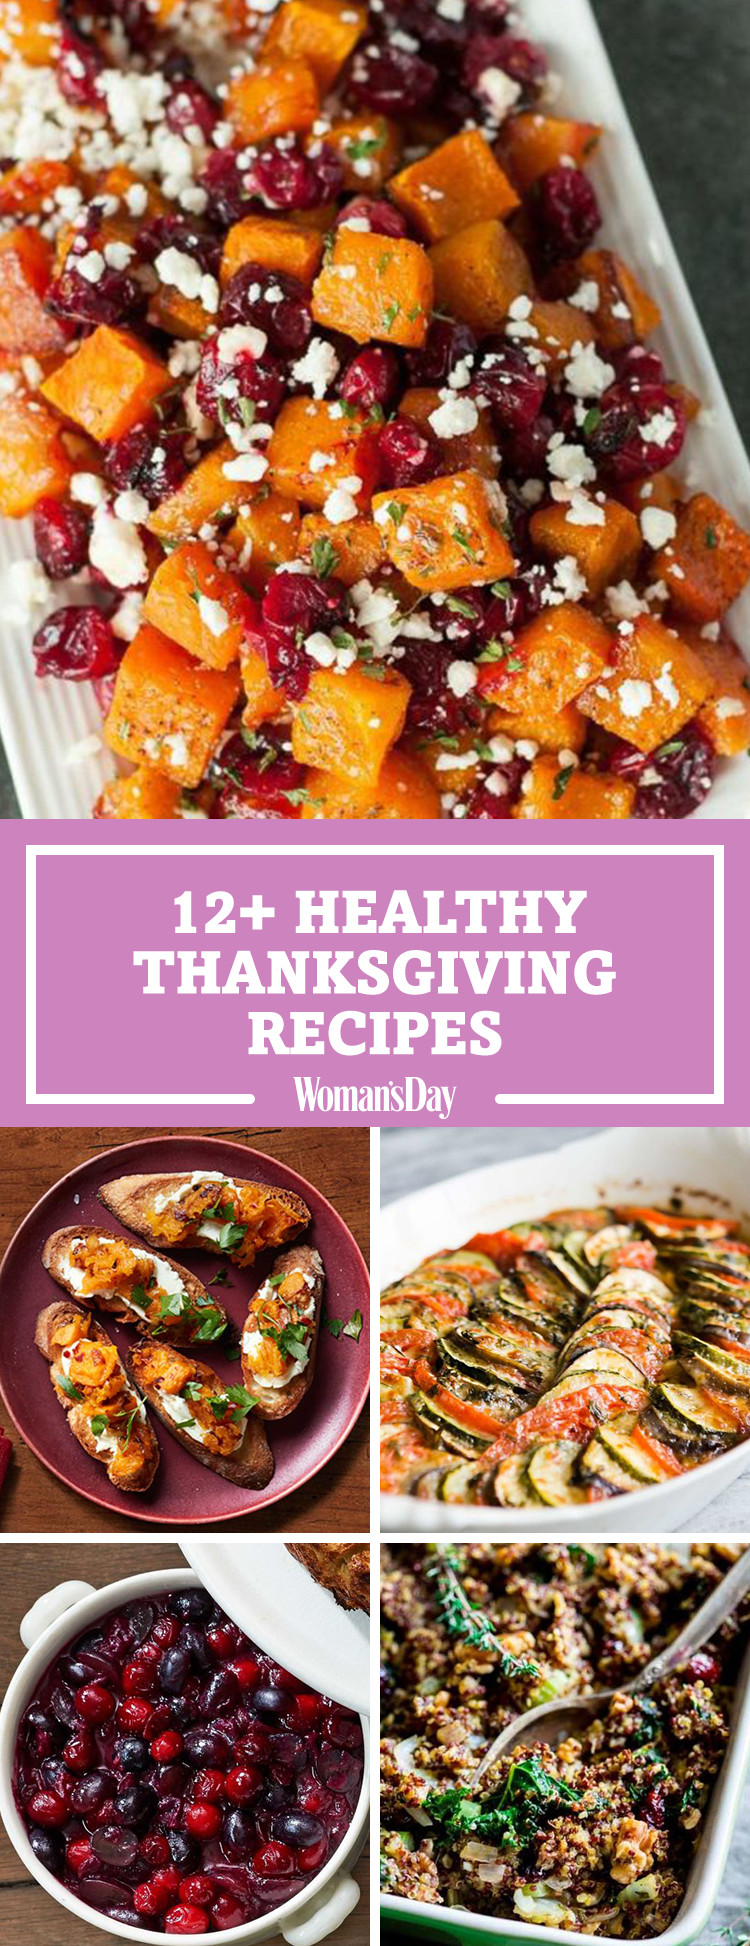 Healthy Thanksgiving Meals
 16 Healthy Thanksgiving Dinner Recipes Healthier Sides